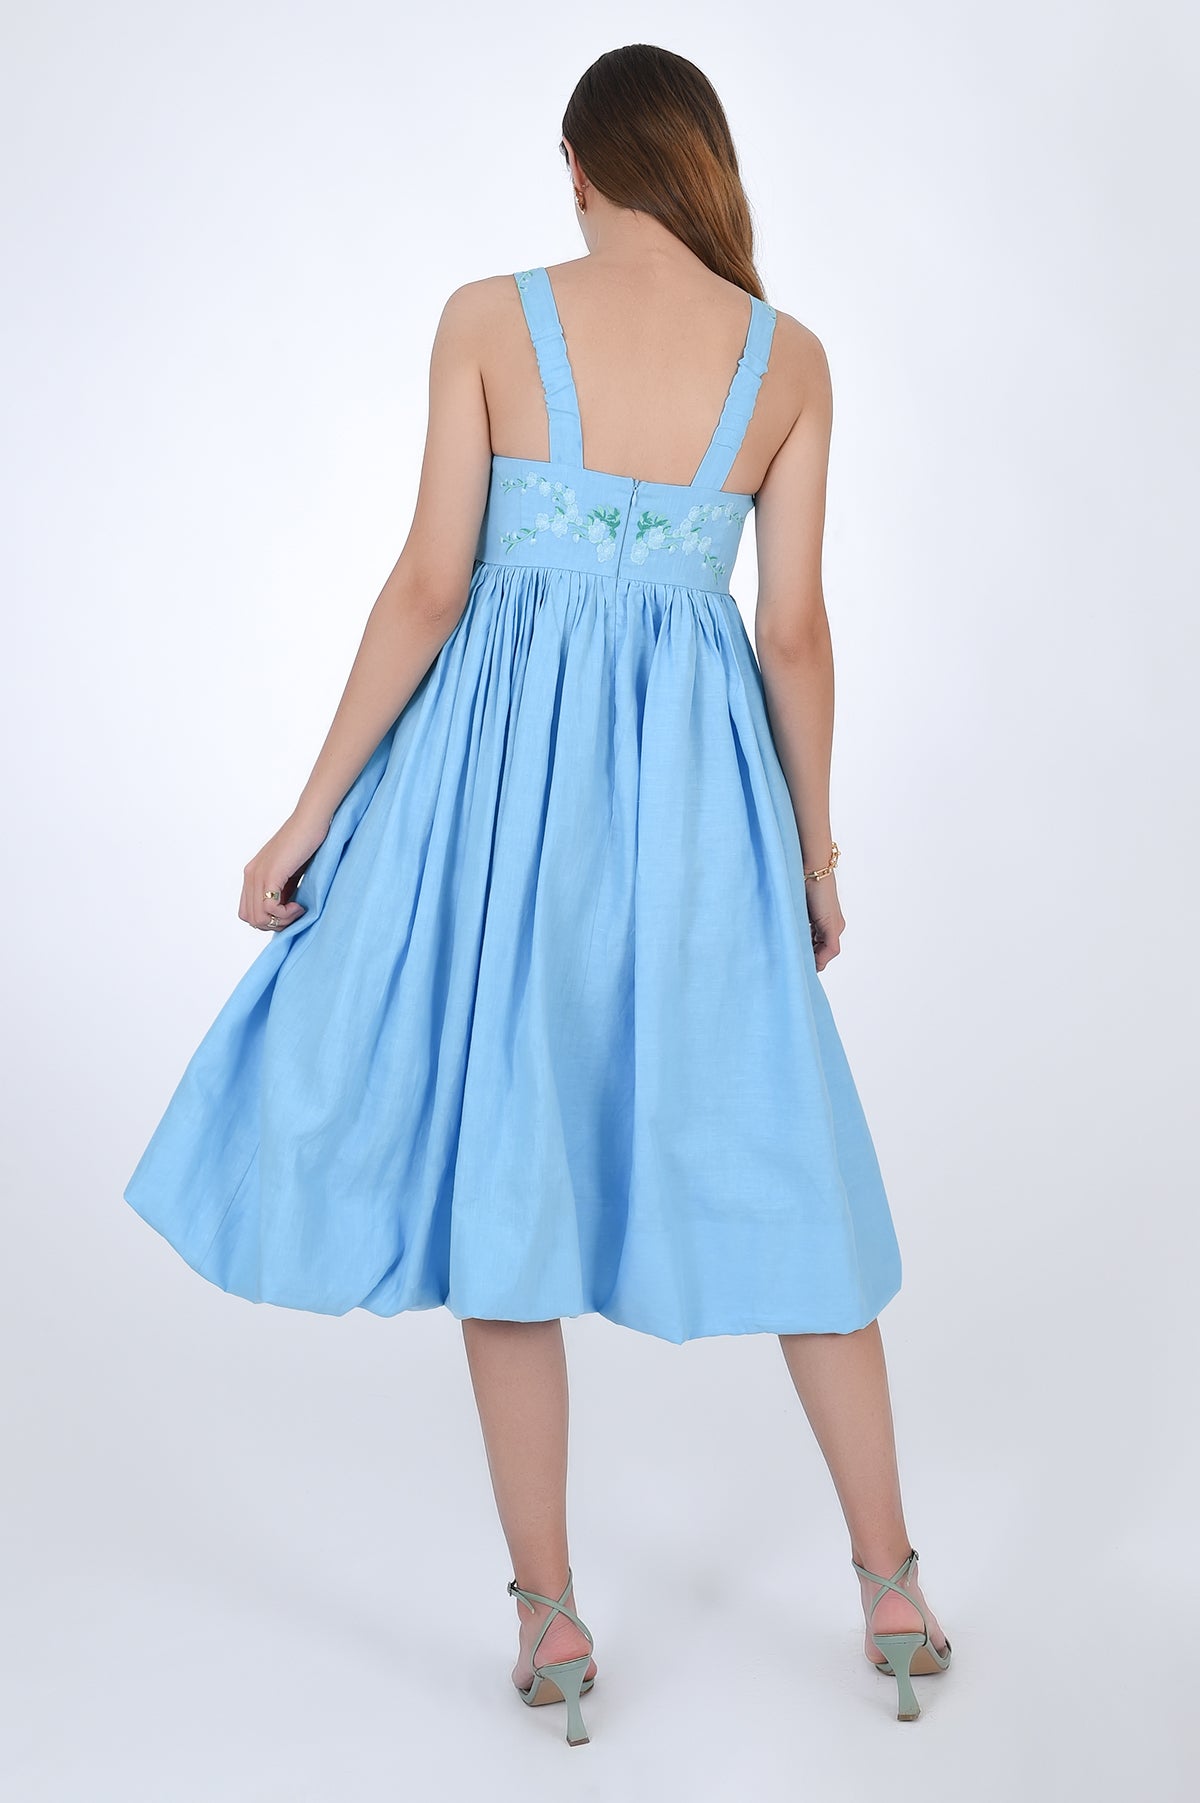 Fanm Mon Meliza 100% Linen Balloon Skirted Dress with Embroidered Detail, Back View. 